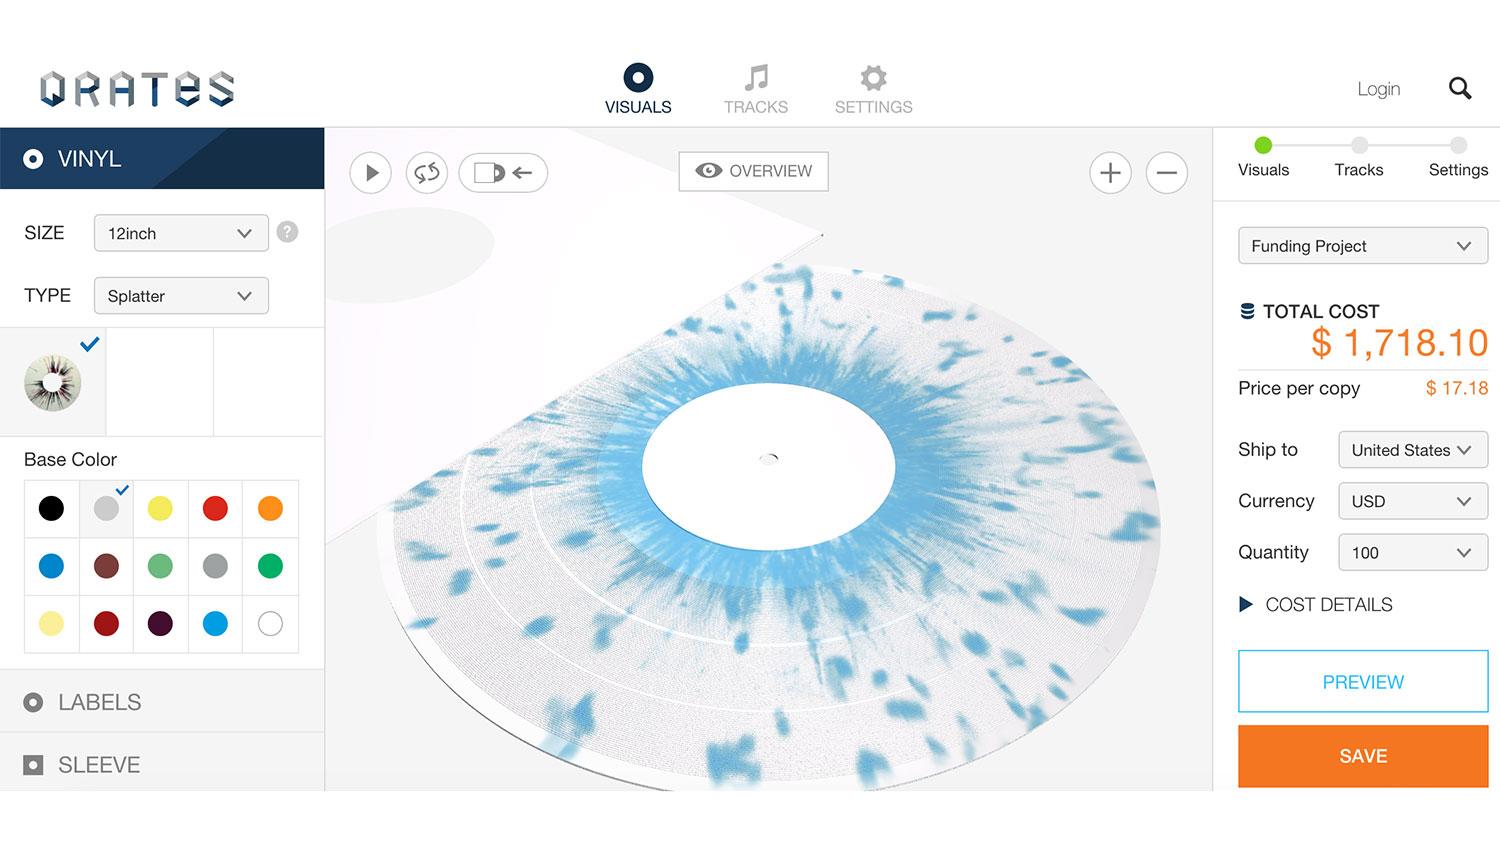 qrates crowdfunding and pressing assistance for vinyl records 10